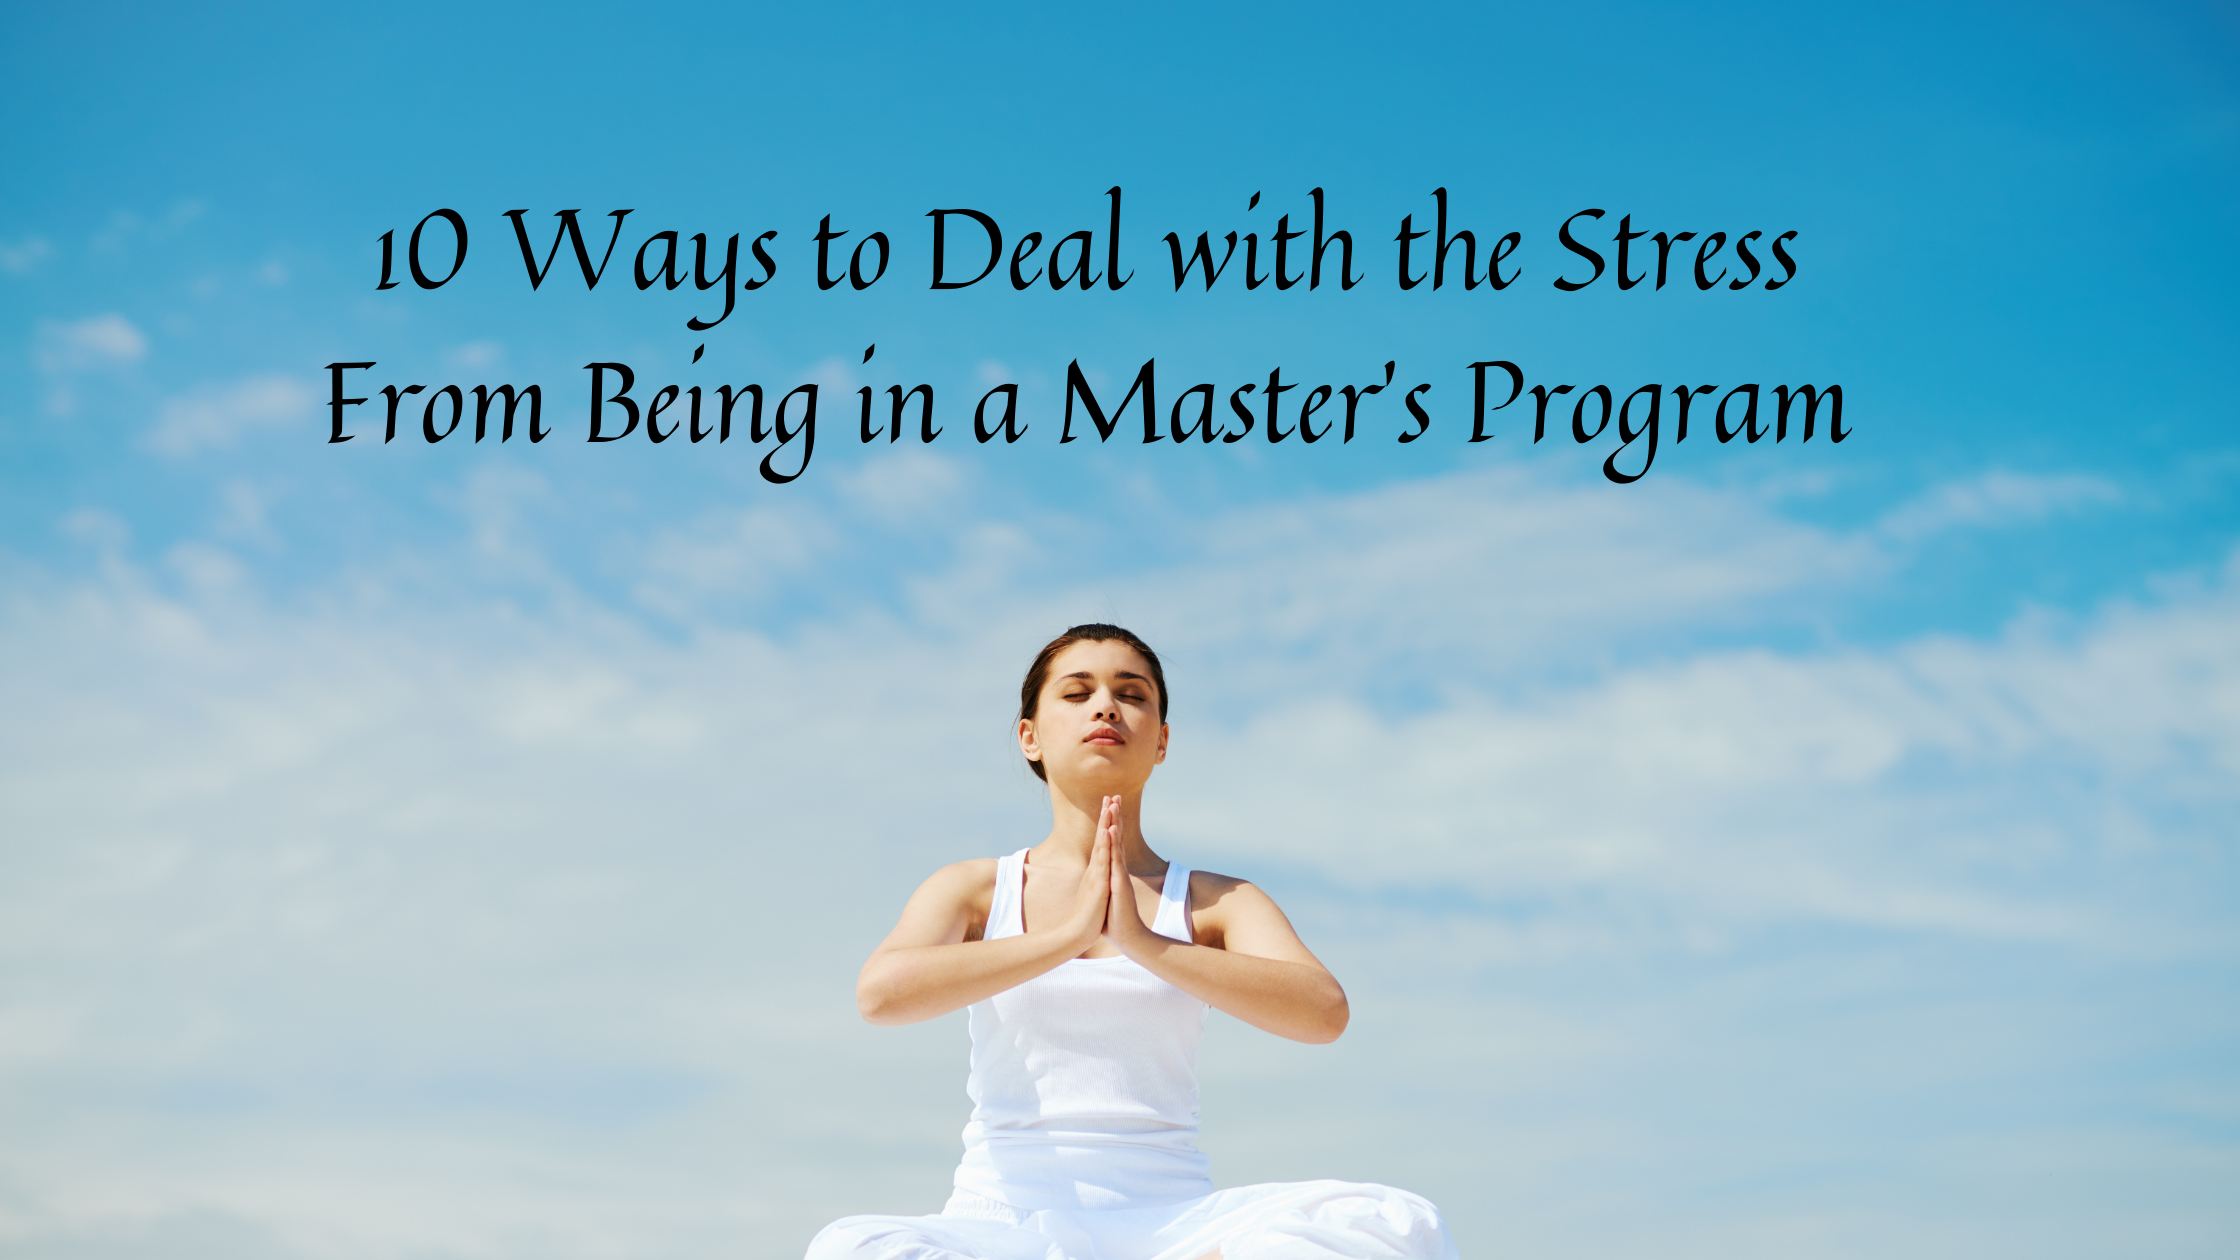 Picture of Beat Master’s Program Stress with these 10 Strategies  